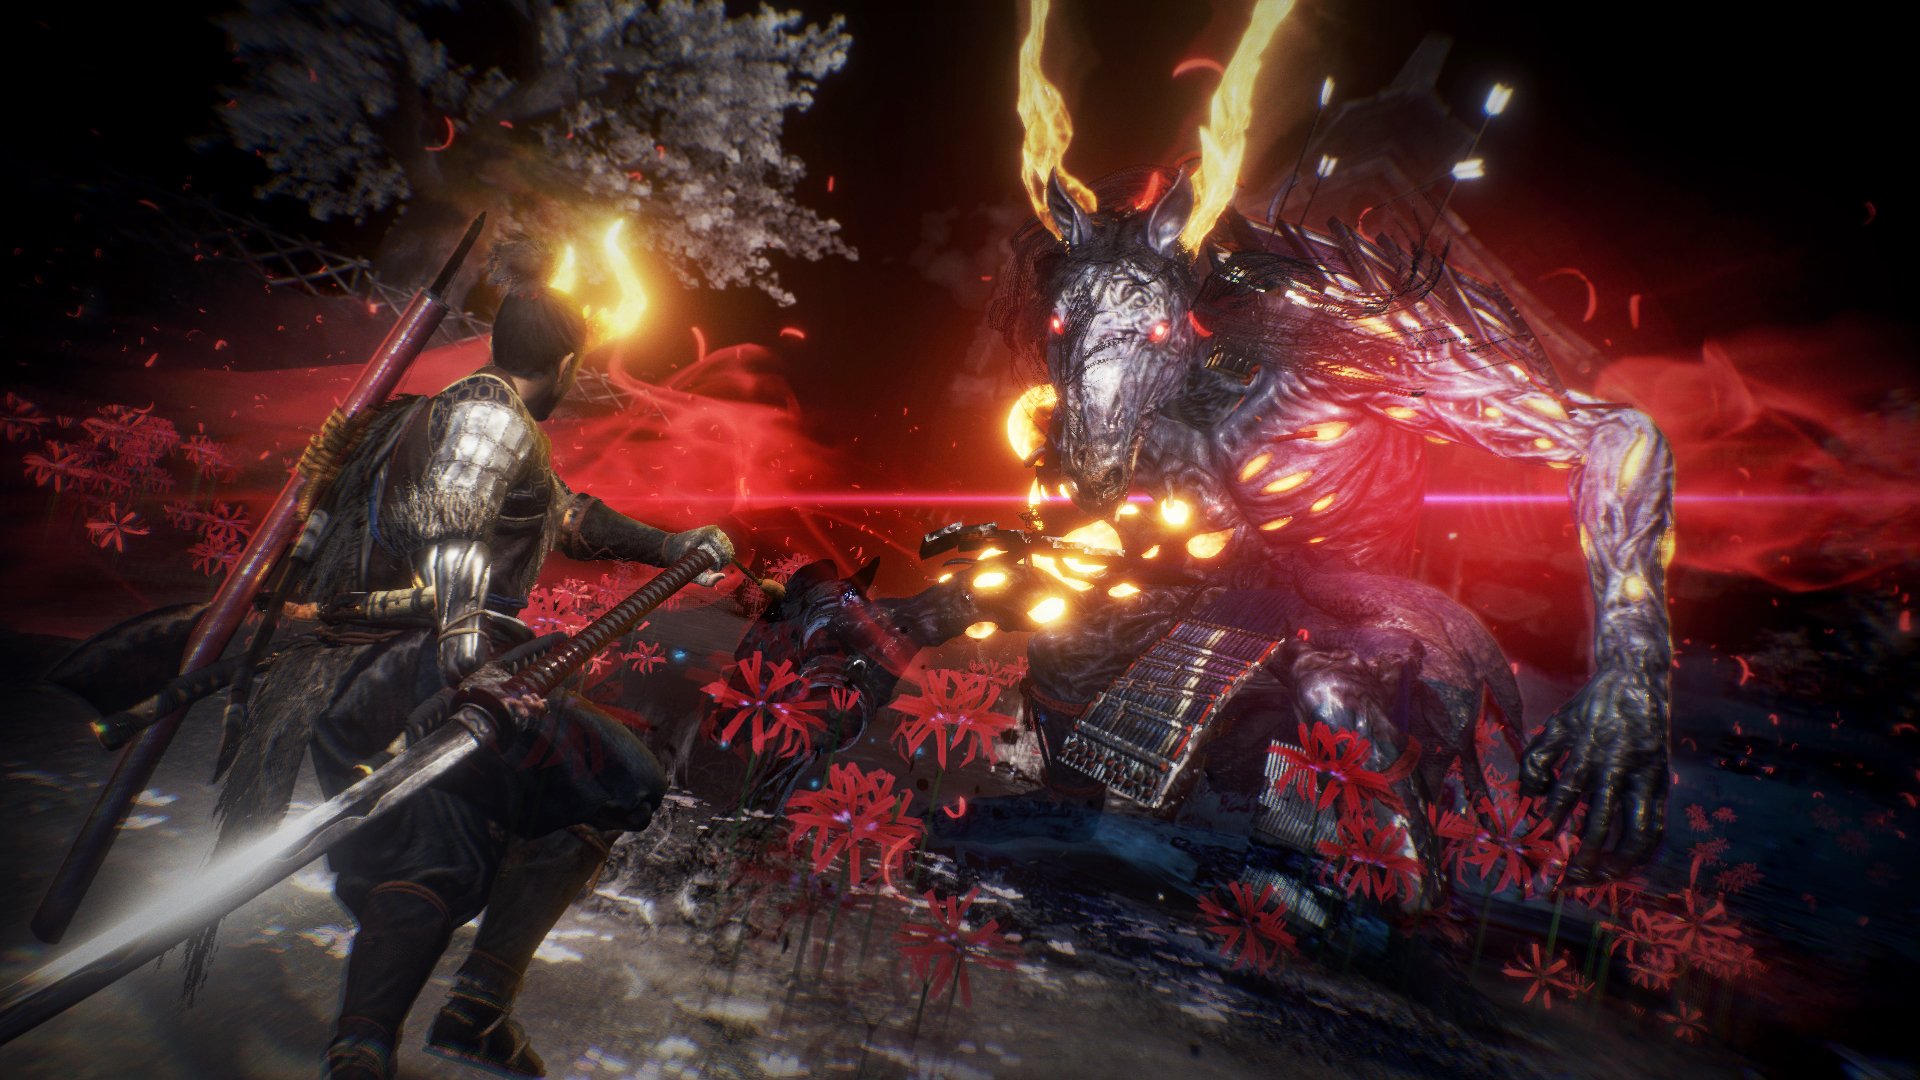 zout frequentie Kalmerend Nioh 2 – New Co-op Gameplay Showcases More Enemies, Instanced Loot